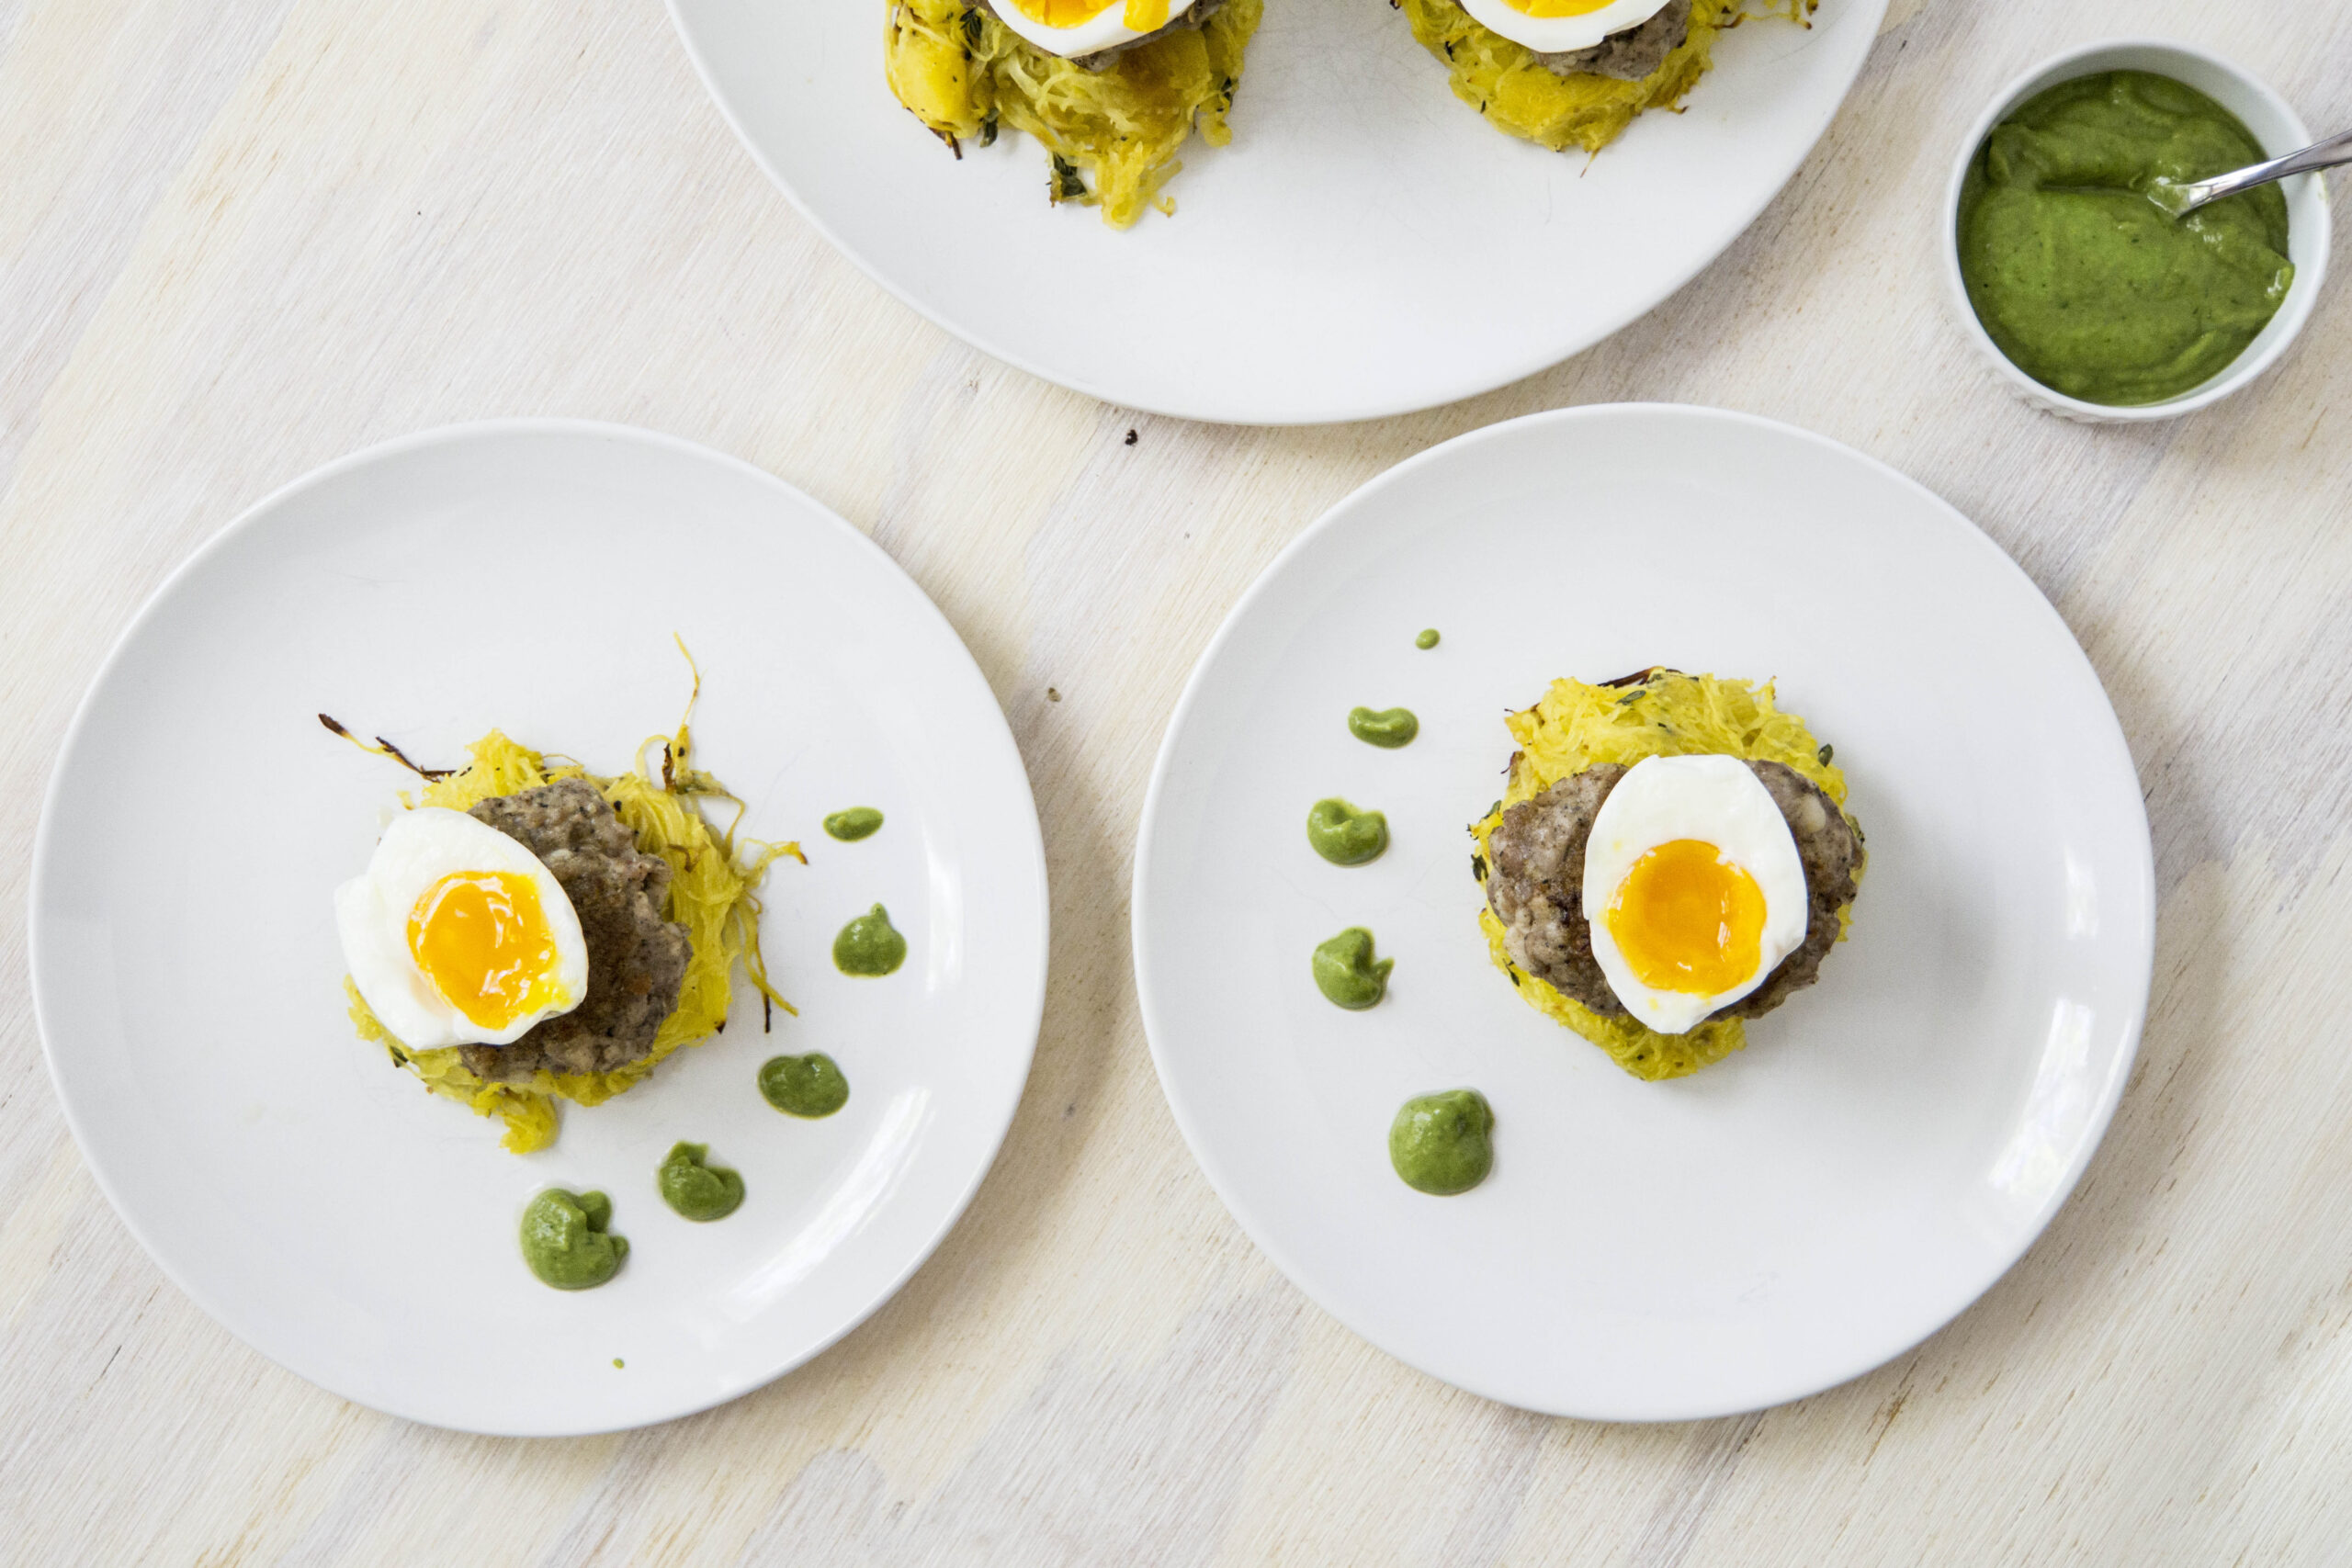 1/2 soft boiled egg over sausage patties and spaghetti squash nests with dotted green sauce on white plates